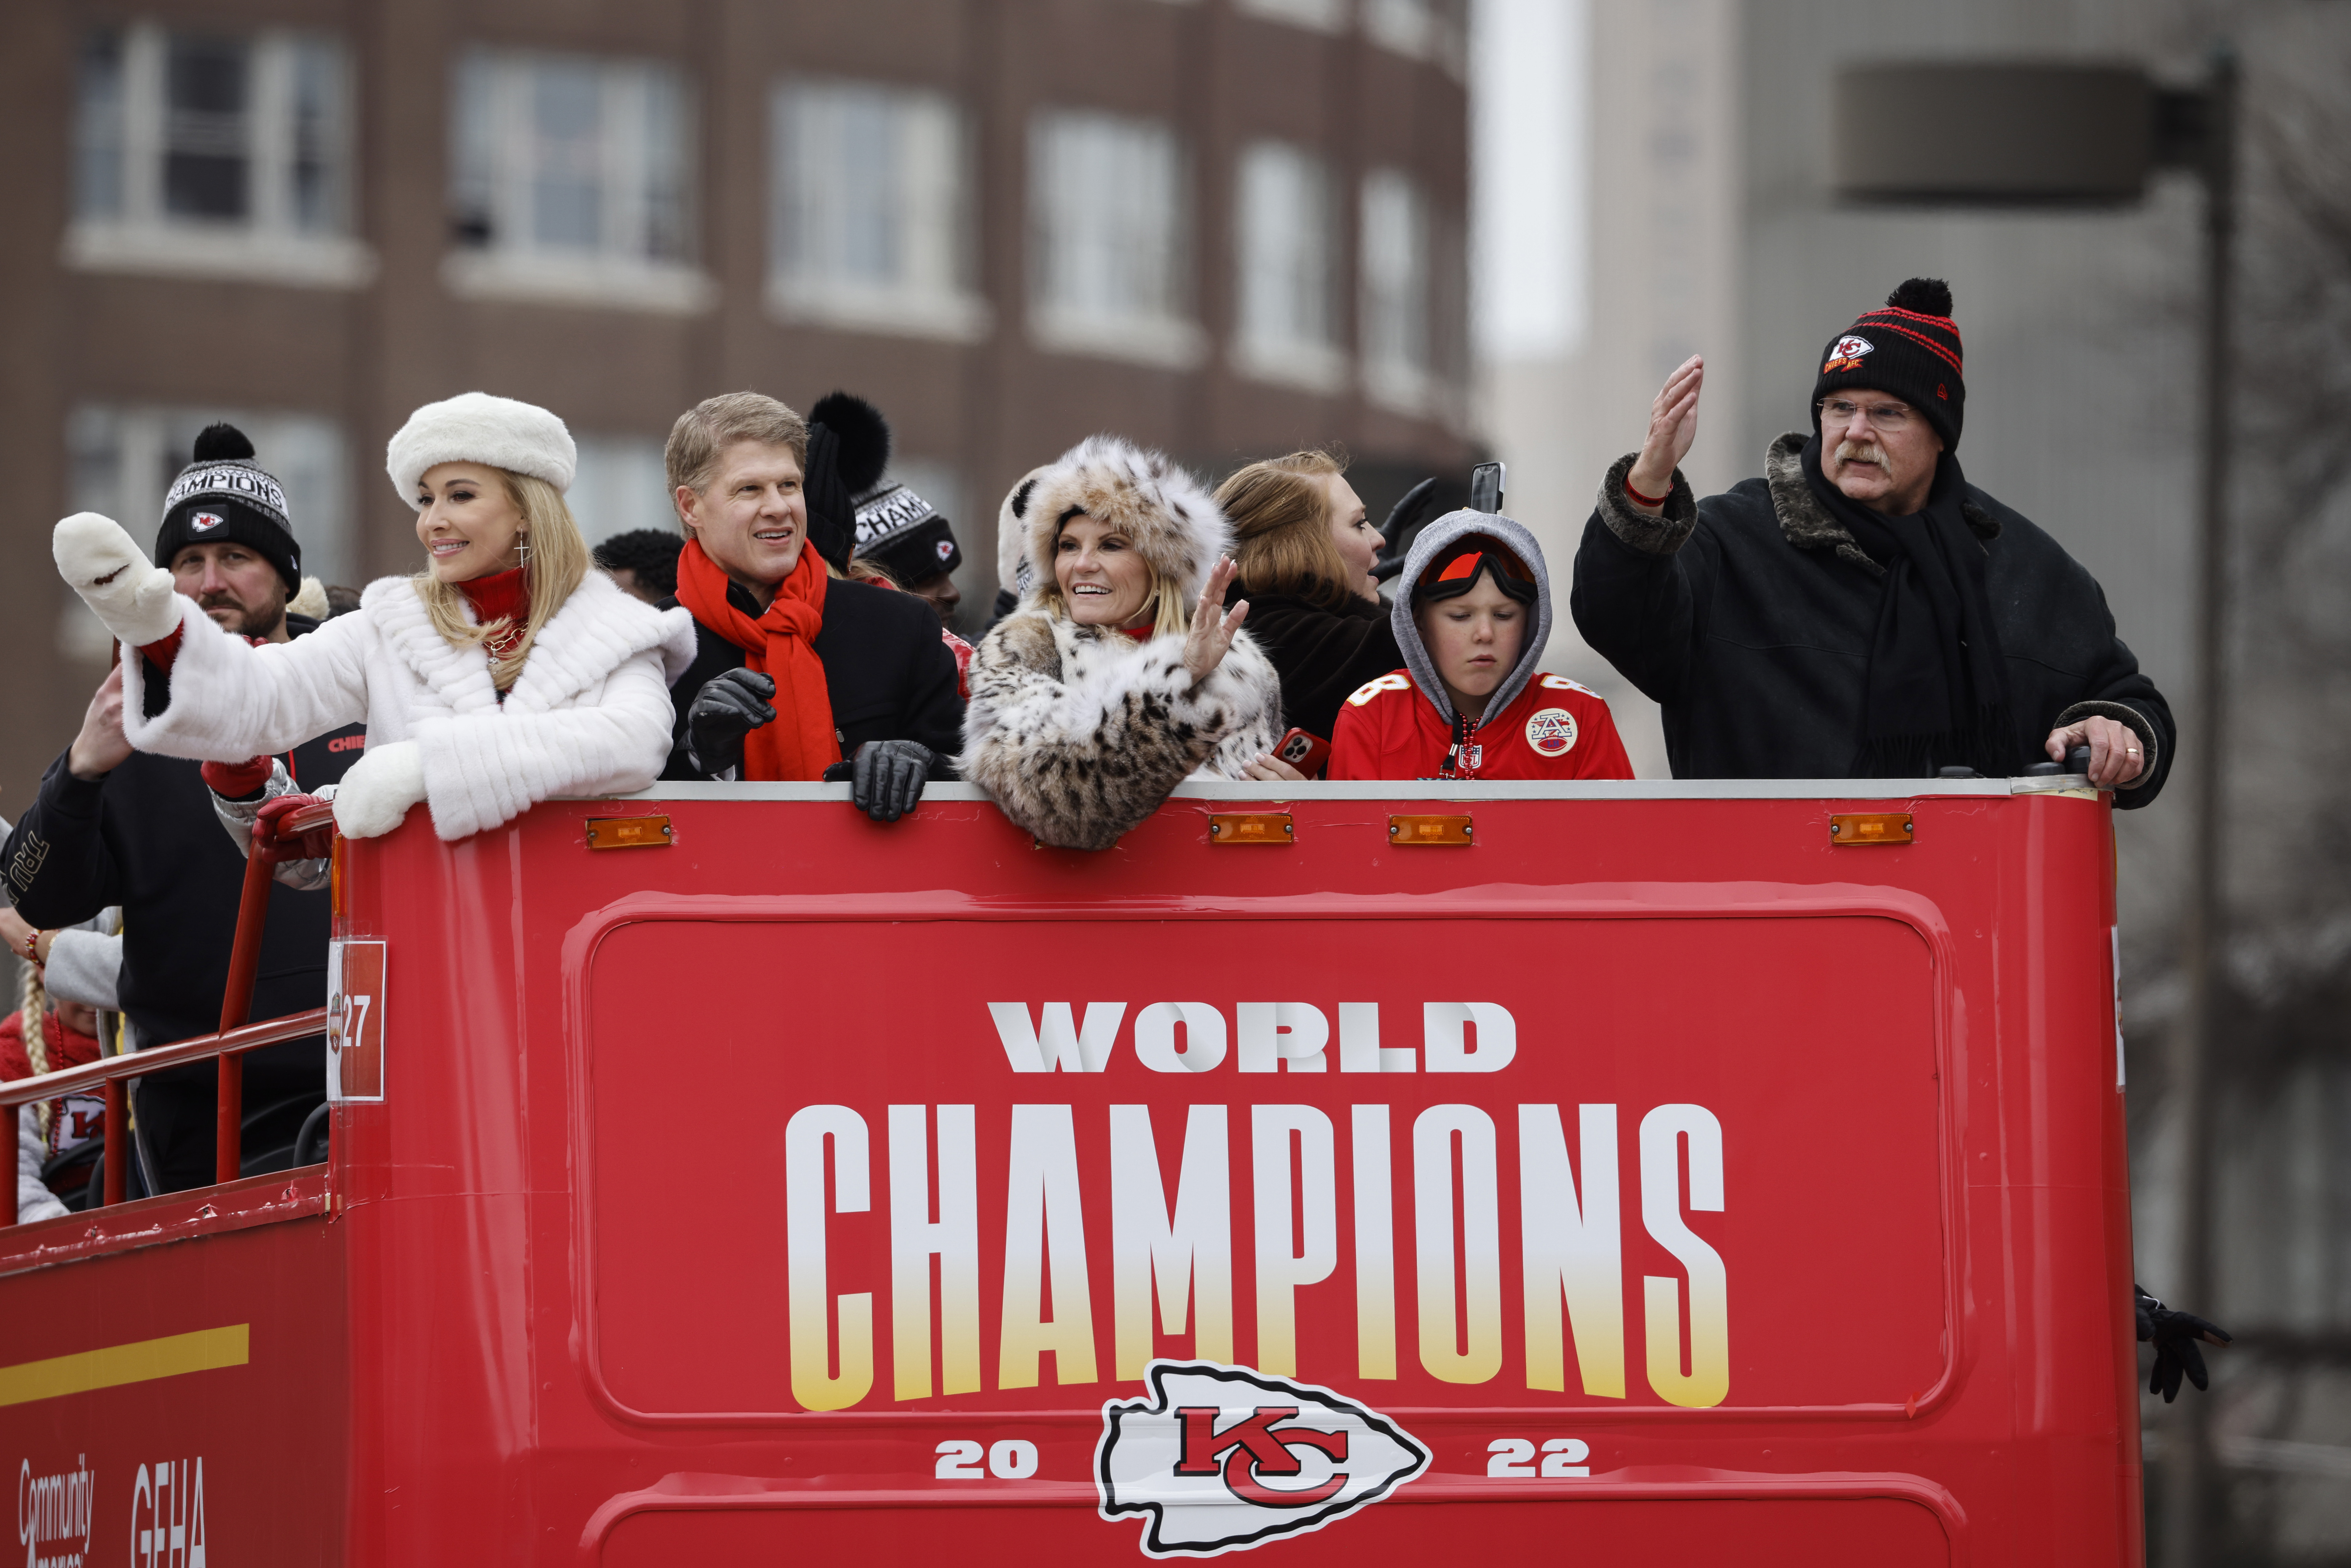 Chiefs Super Bowl parade: KCPD helicopter shows crowd of fans